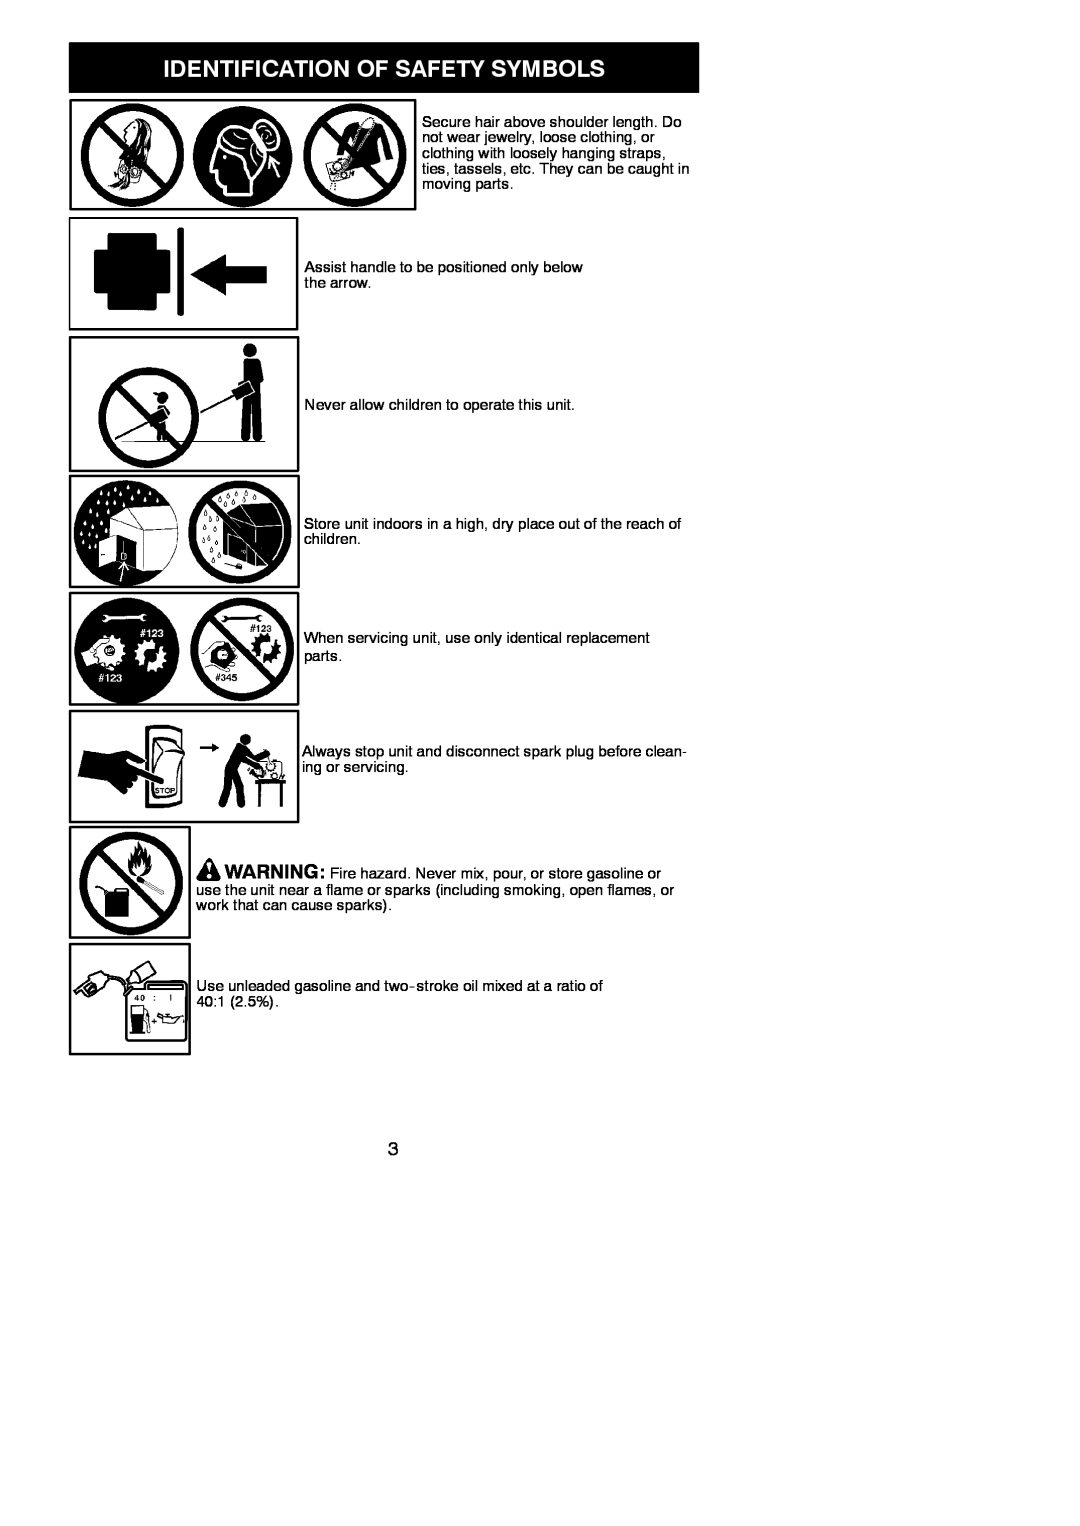 Poulan 115275026, 952711963 Identification Of Safety Symbols, Assist handle to be positioned only below the arrow 